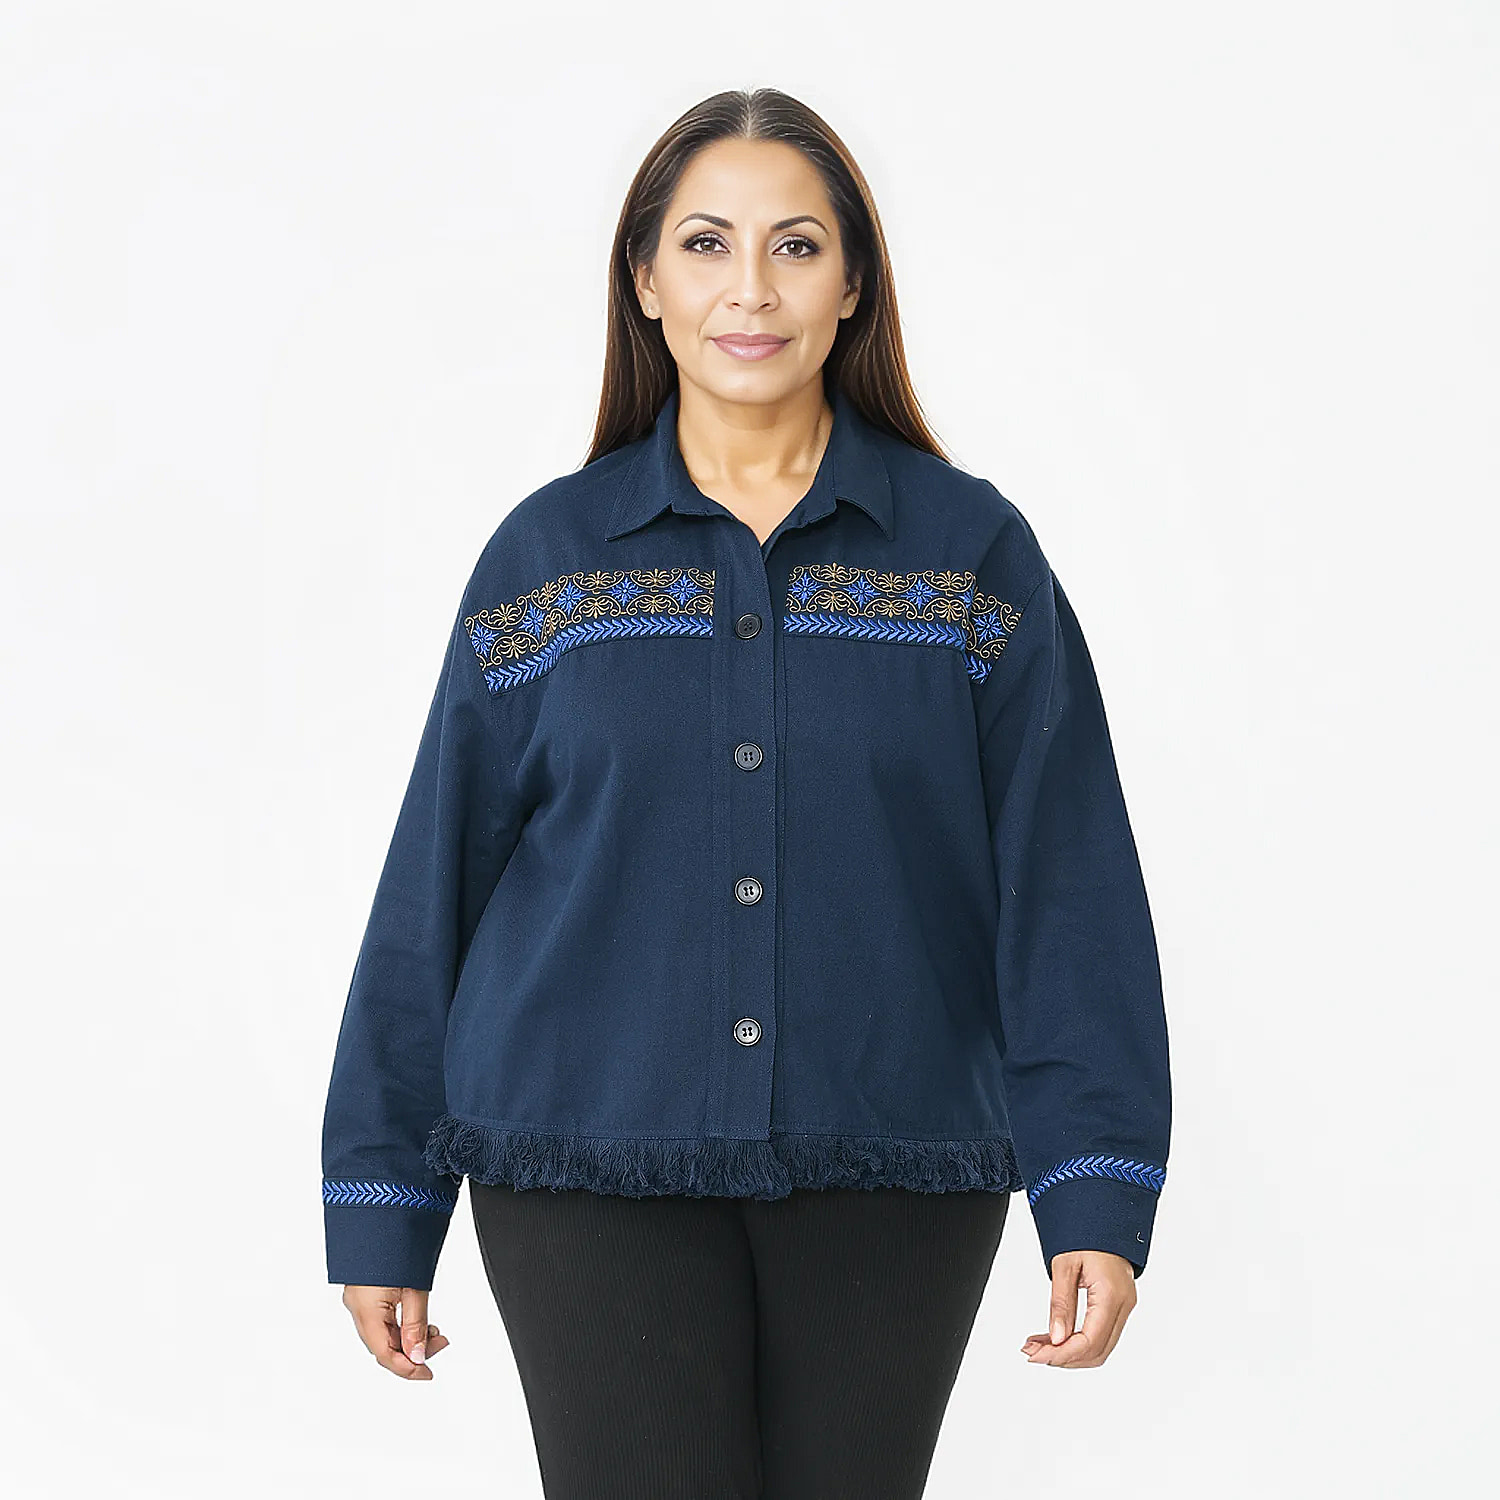 Tamsy 100% Cotton Embroidered Jacket (Size L,16-18) - Navy